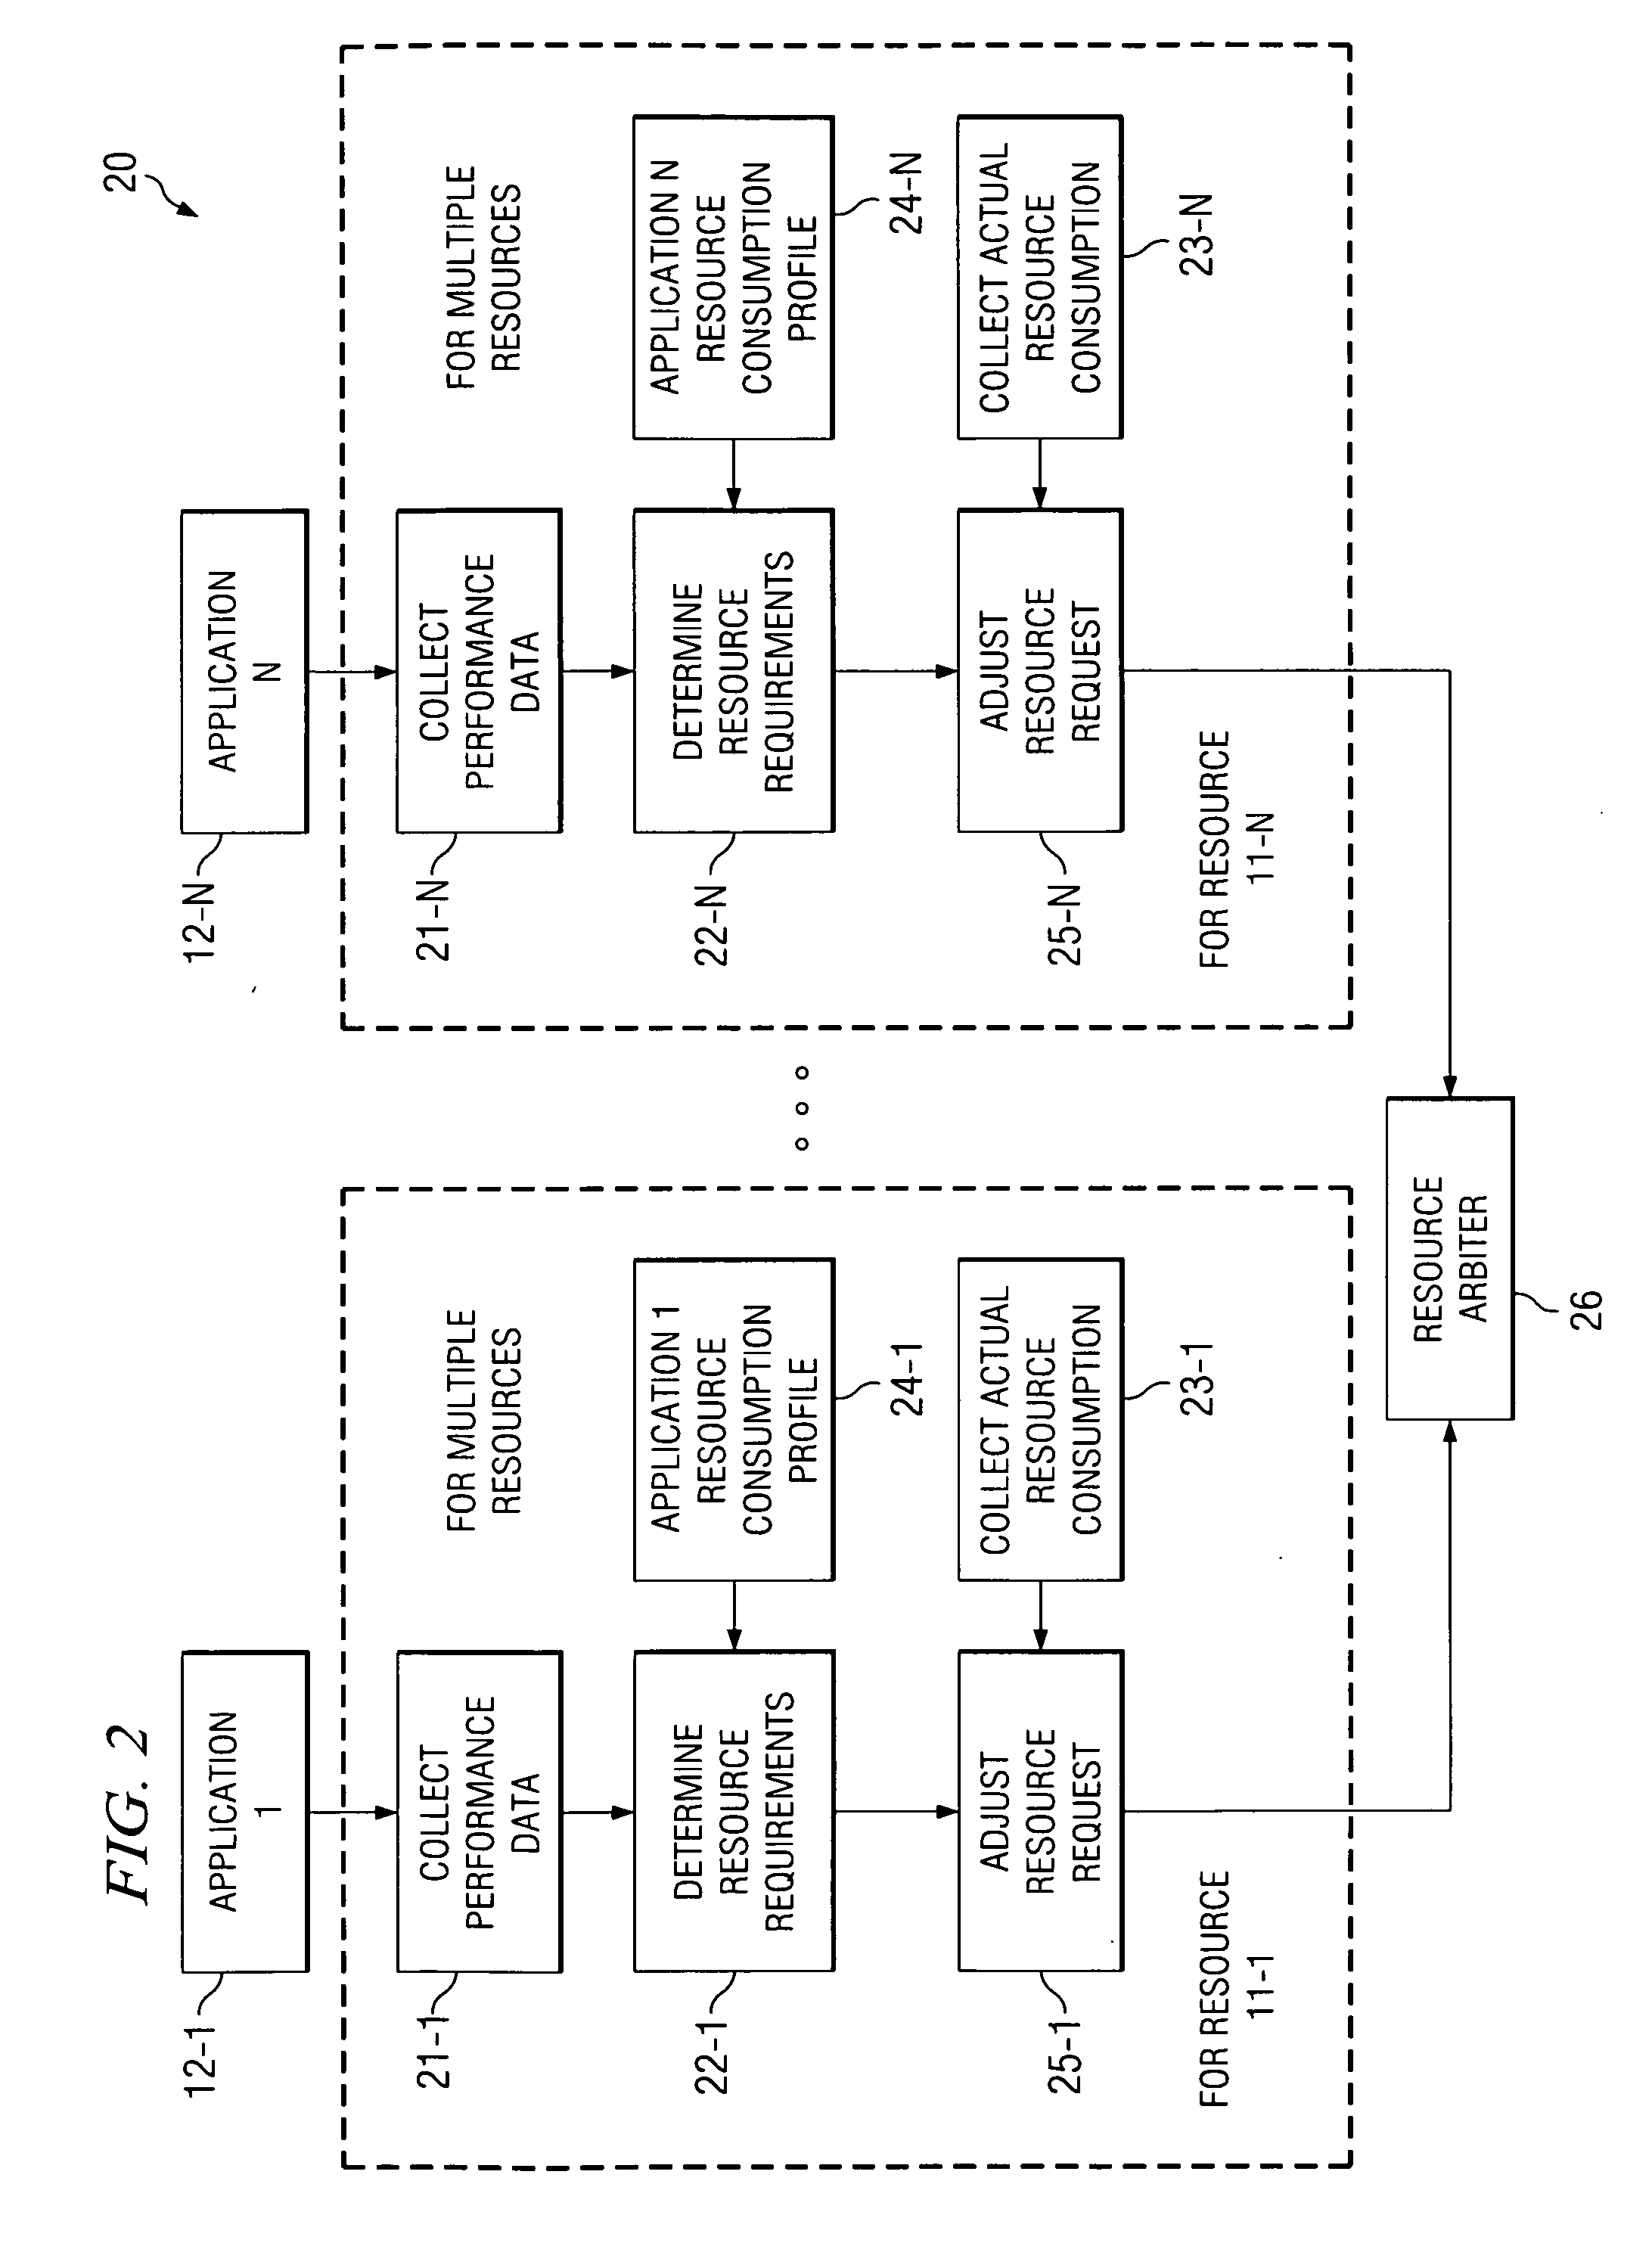 System and method for adjusting multiple resources across multiple workloads